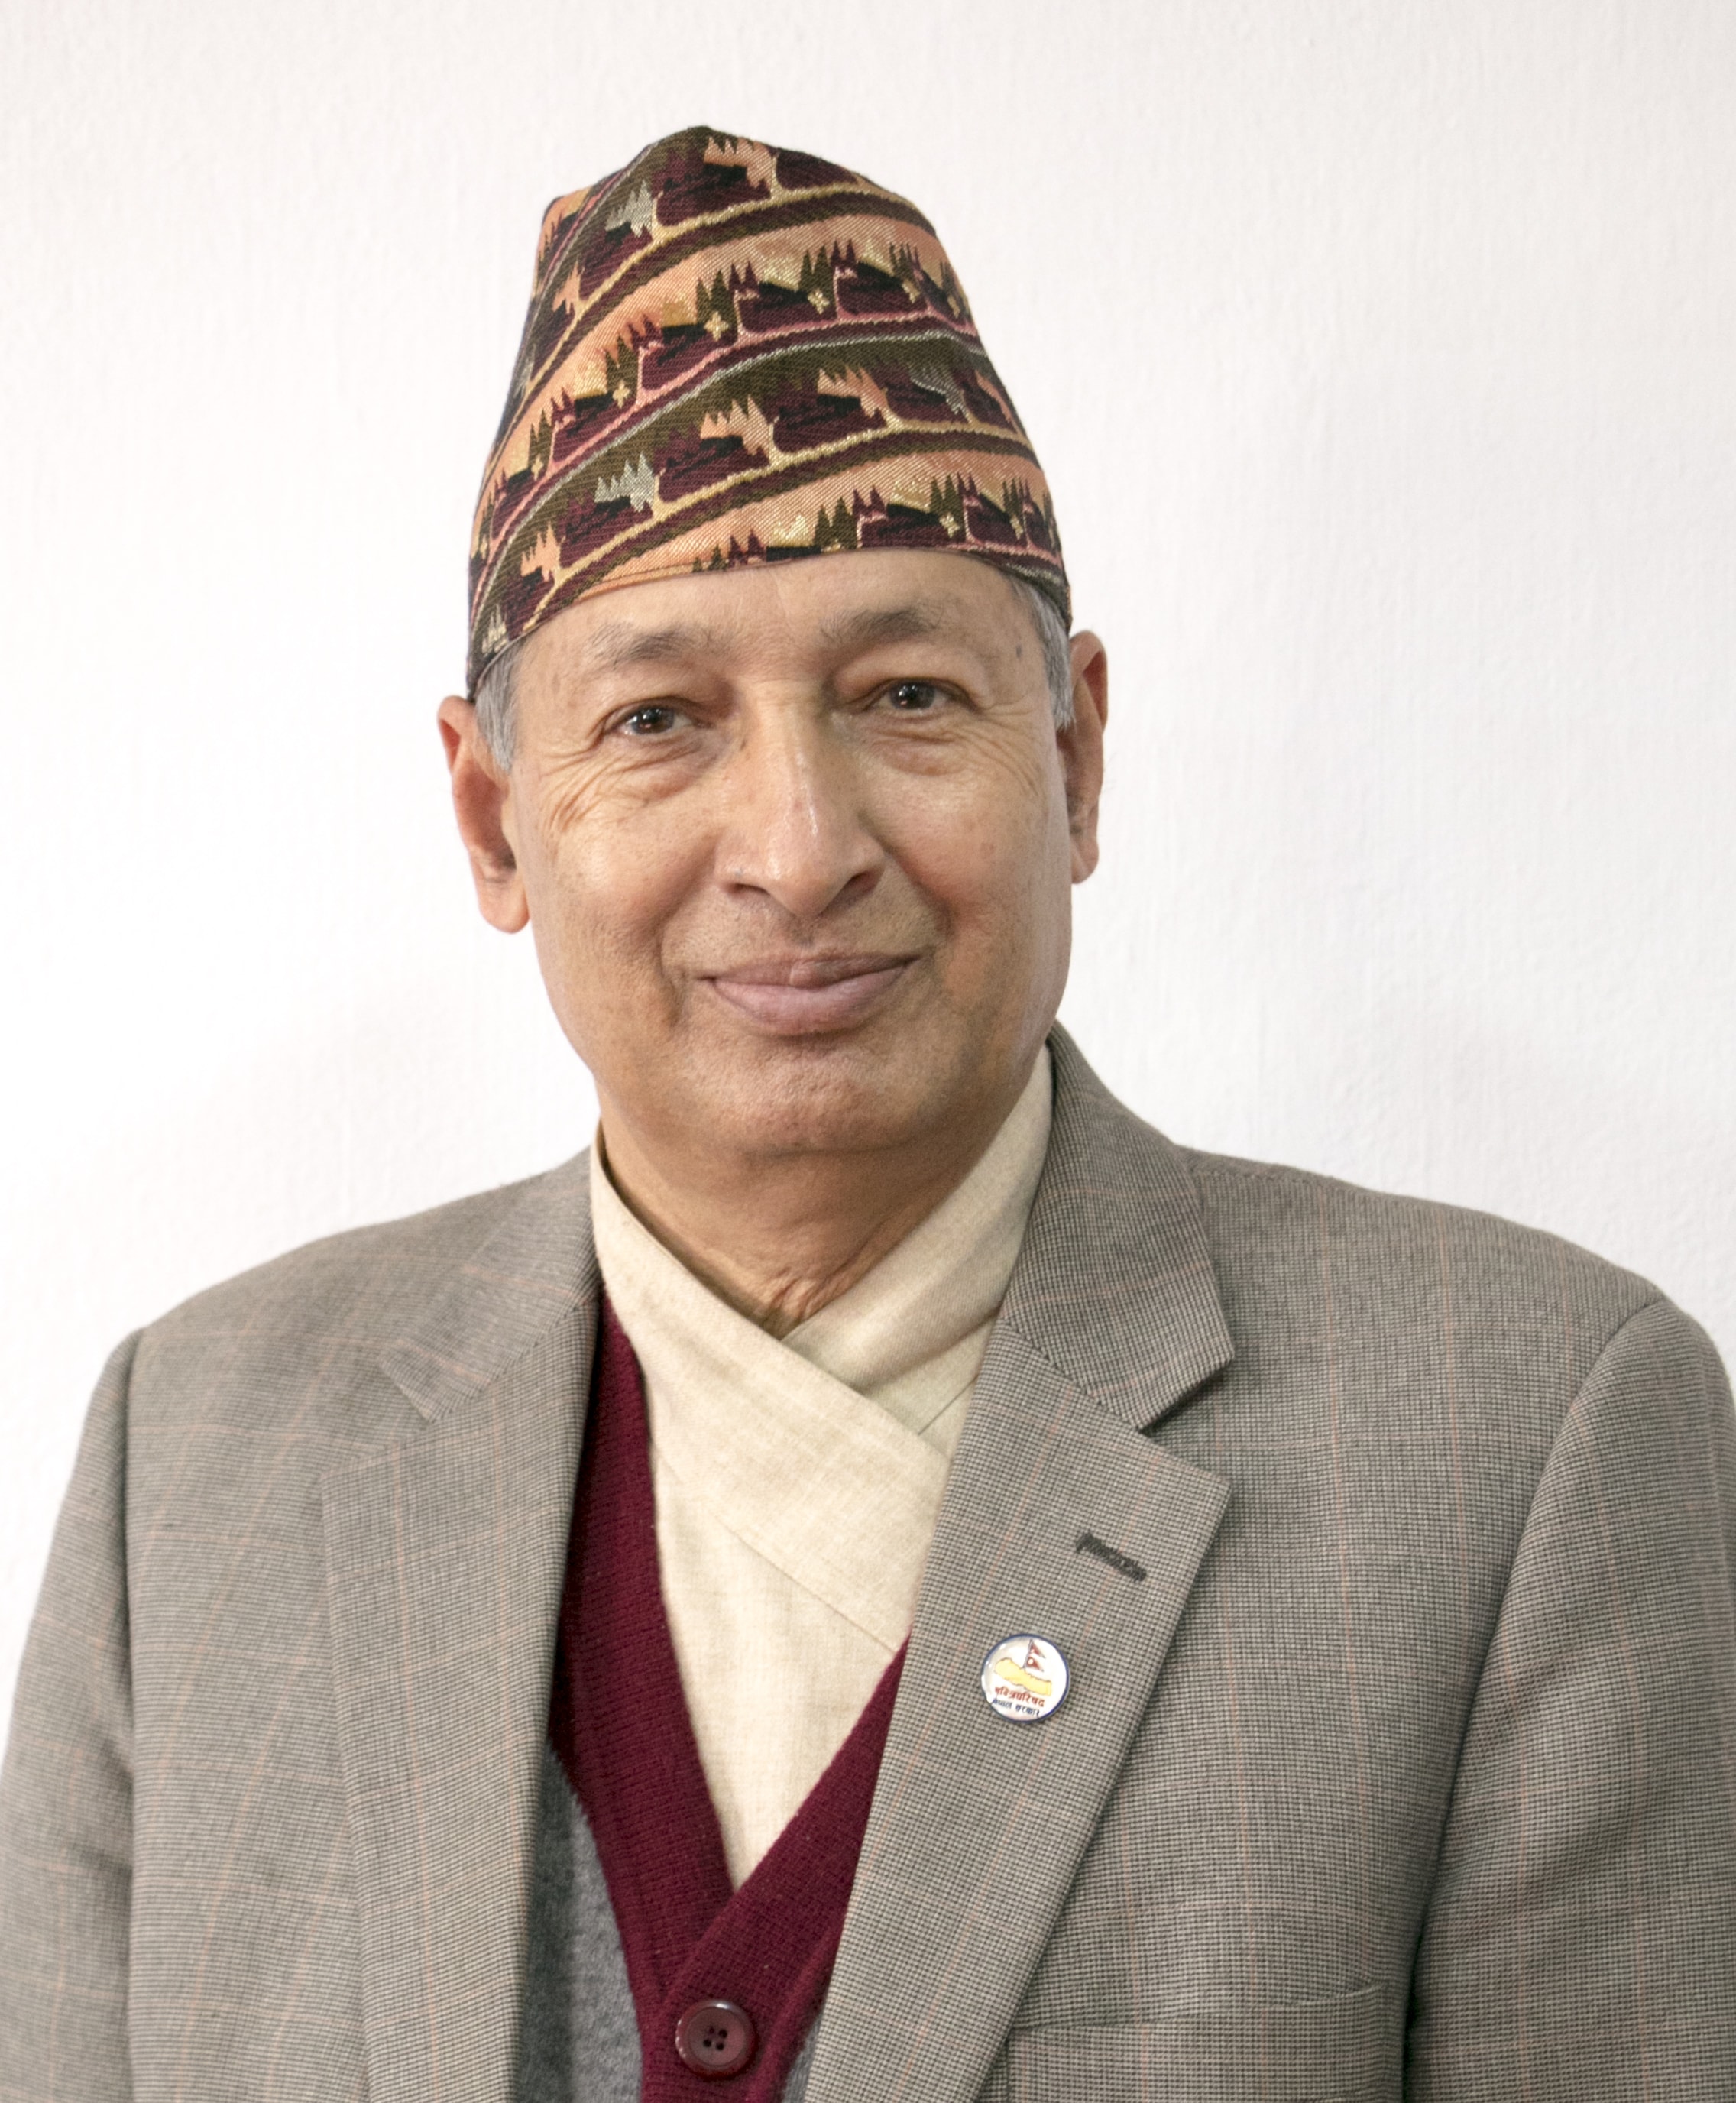 Govt to extend supports to working class people, Spokesperson Dr Khatiwada